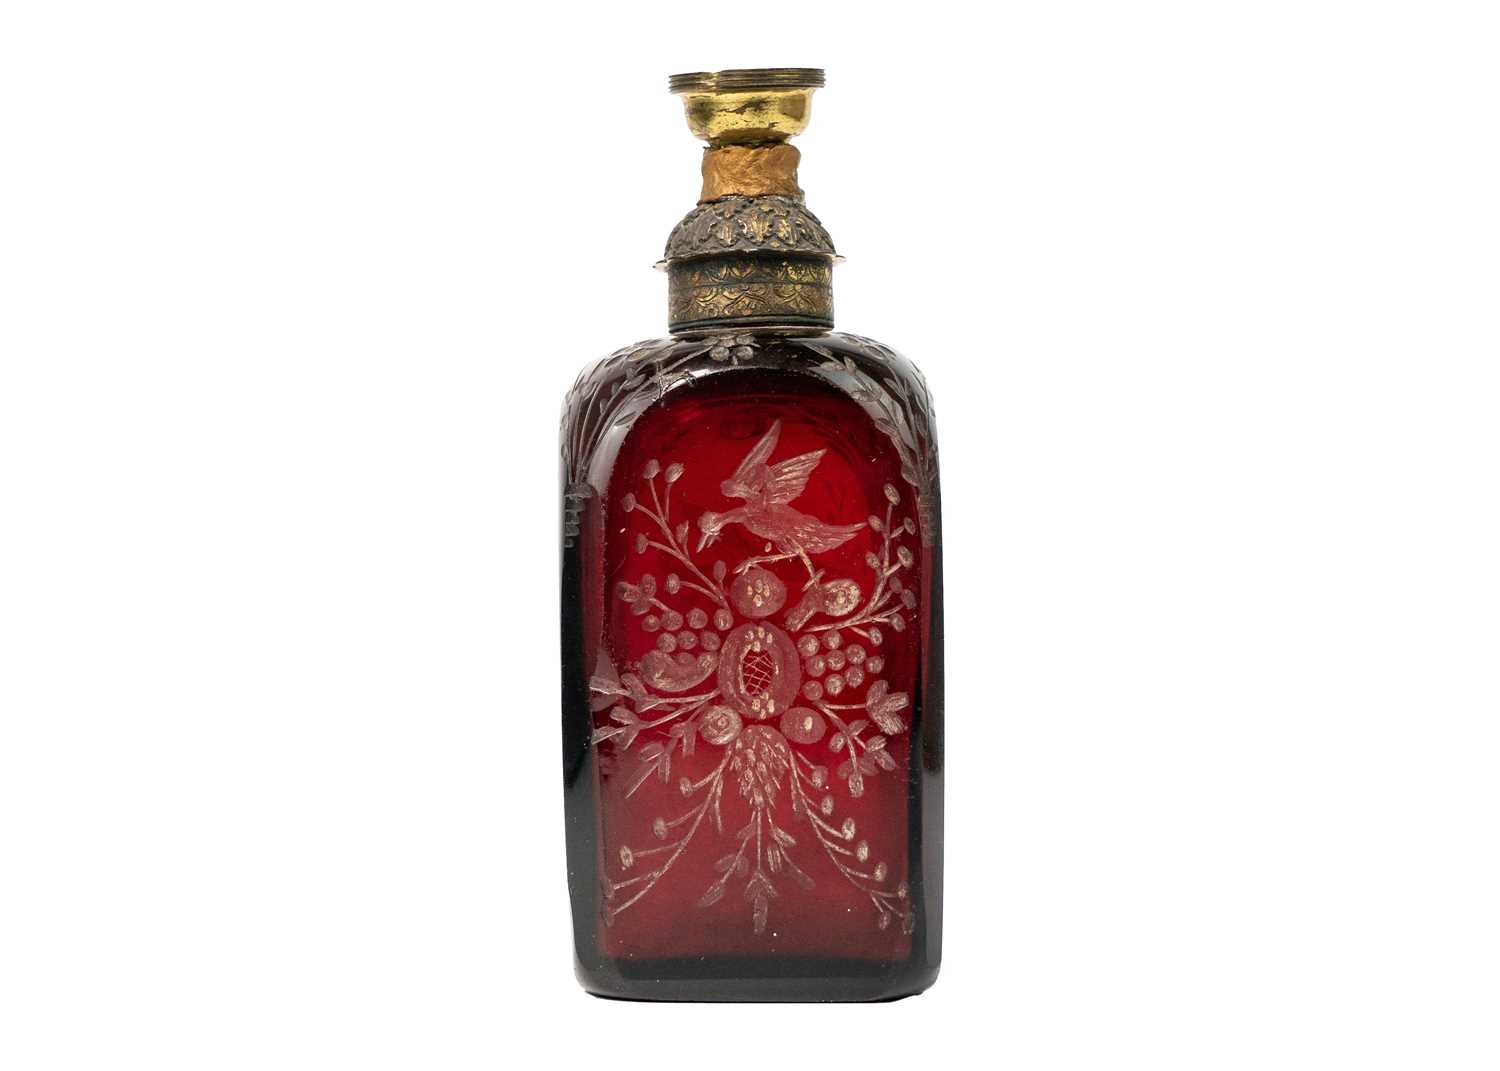 An early 18th century ruby glass decanter, etched with exotic birds, flowers and foliage. - Image 2 of 7